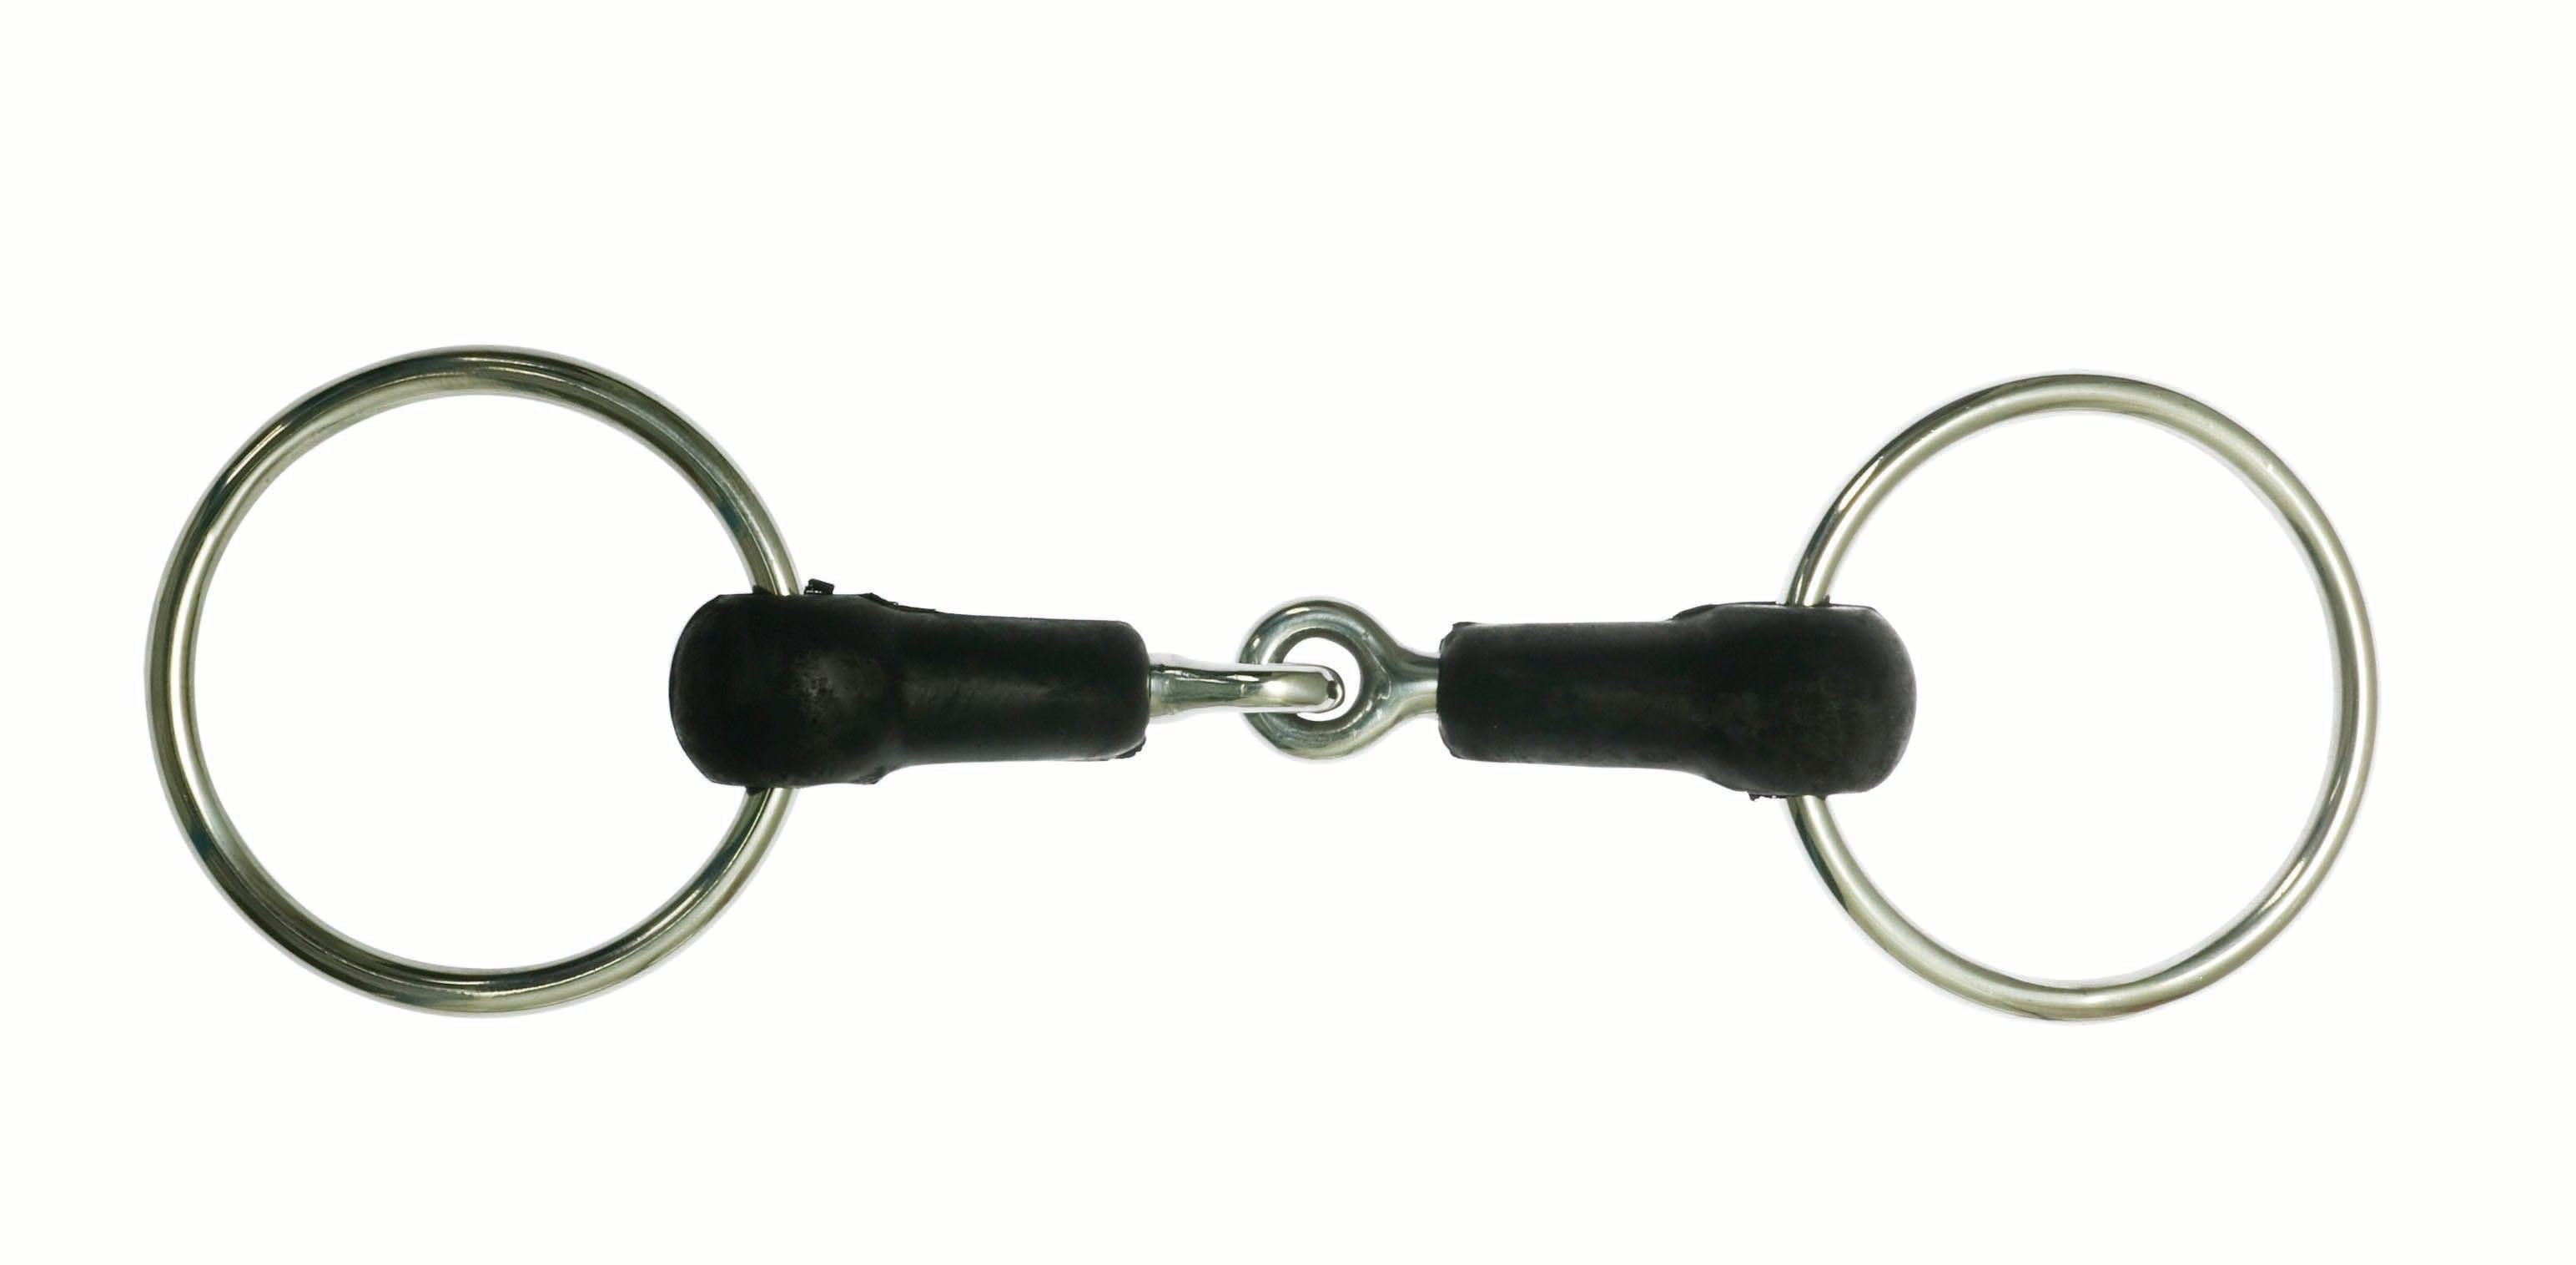 Large ring rubber Snaffle